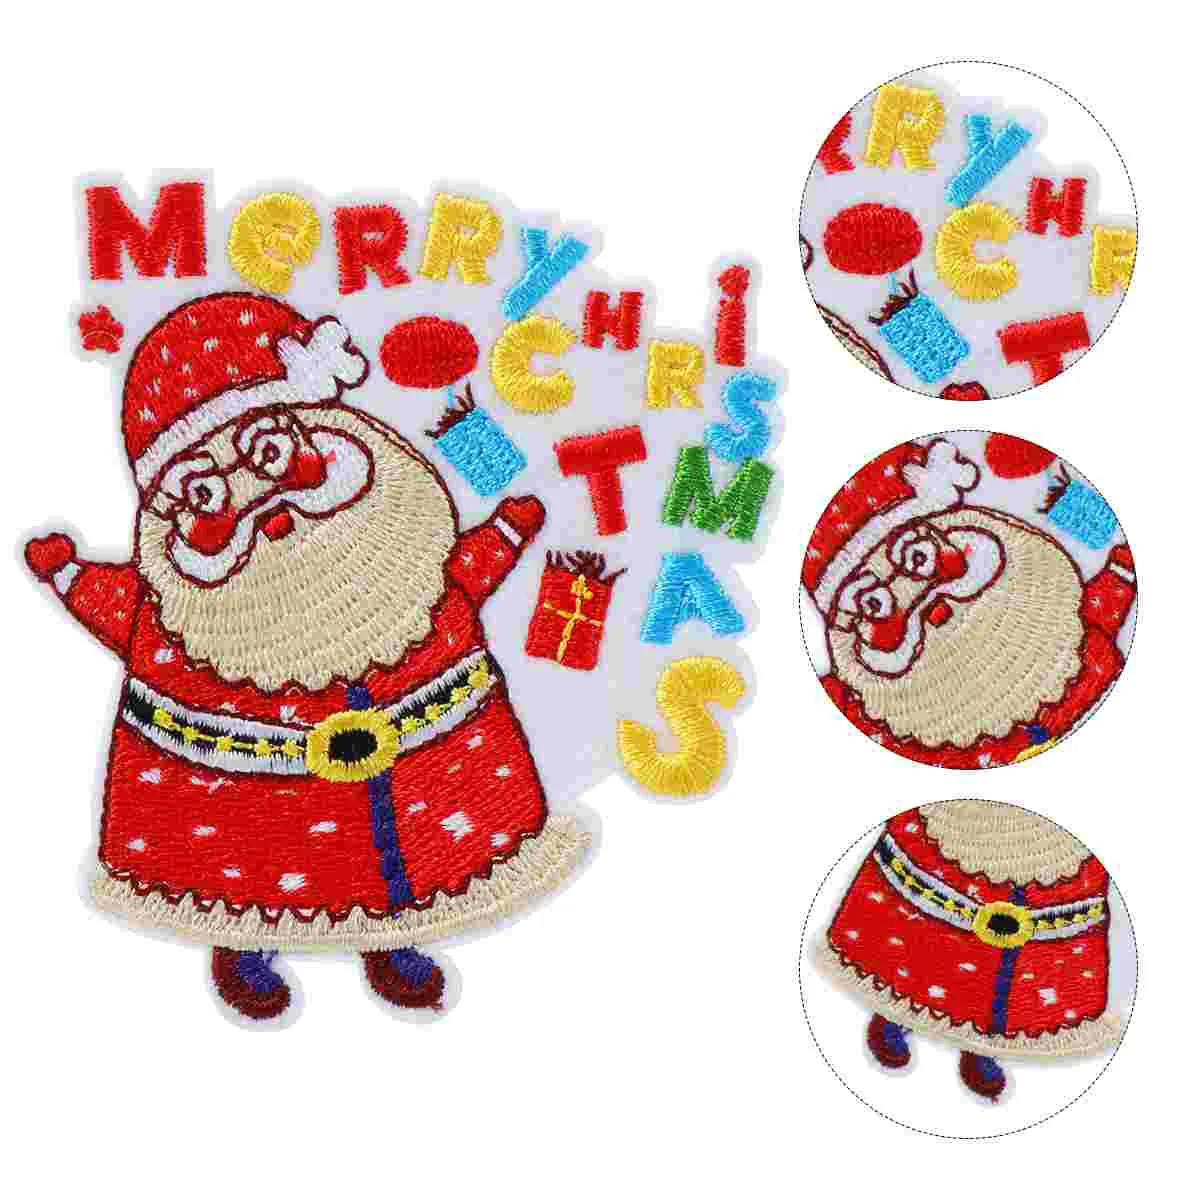 

Christmasembroidered Appliques Sewing Sewclothes Holiday Decorative Repair Patch Xmas Clothing Applique